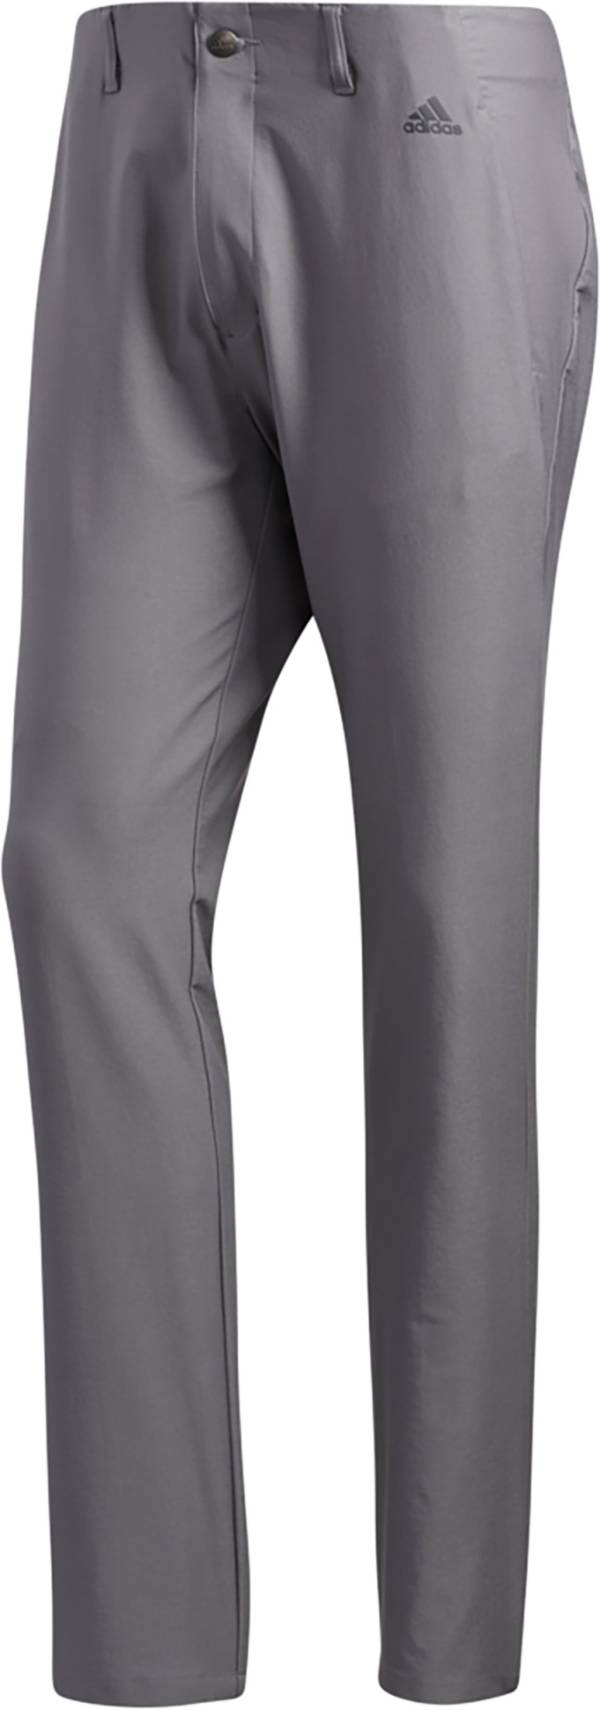 adidas Men's Ultimate365 3-Stripes Tapered Golf Pants product image